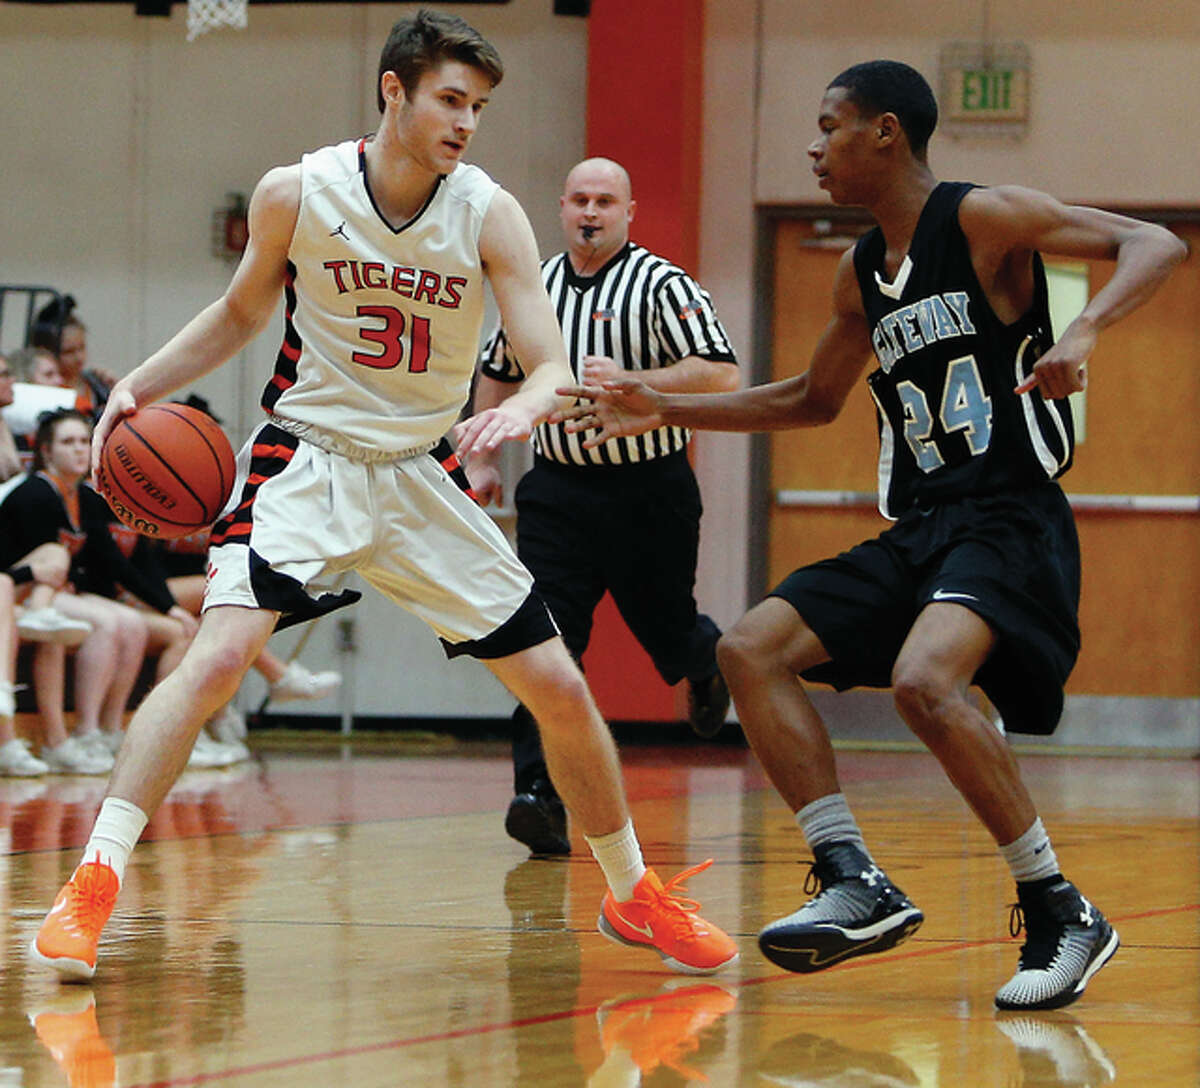 Edwardsville’s Oliver Stephen (left) handles the basketball while Gateway STEM’s David Borland defends during a nonconference boys basketball game Monday night at Lucco-Jackson Gym in Edwardsville.